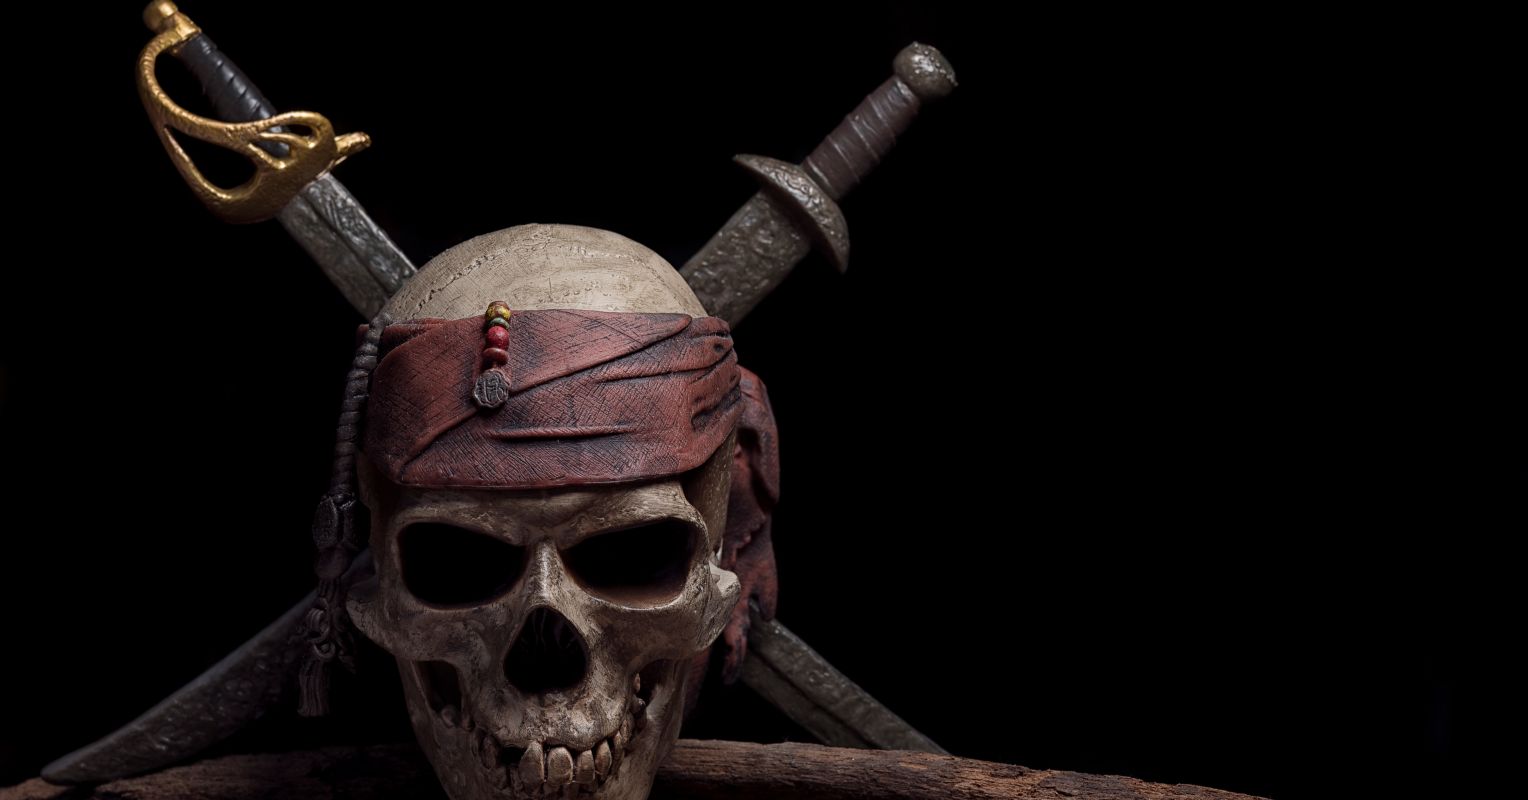 Pirates, Poison, and Professors: A Look at the Skull and